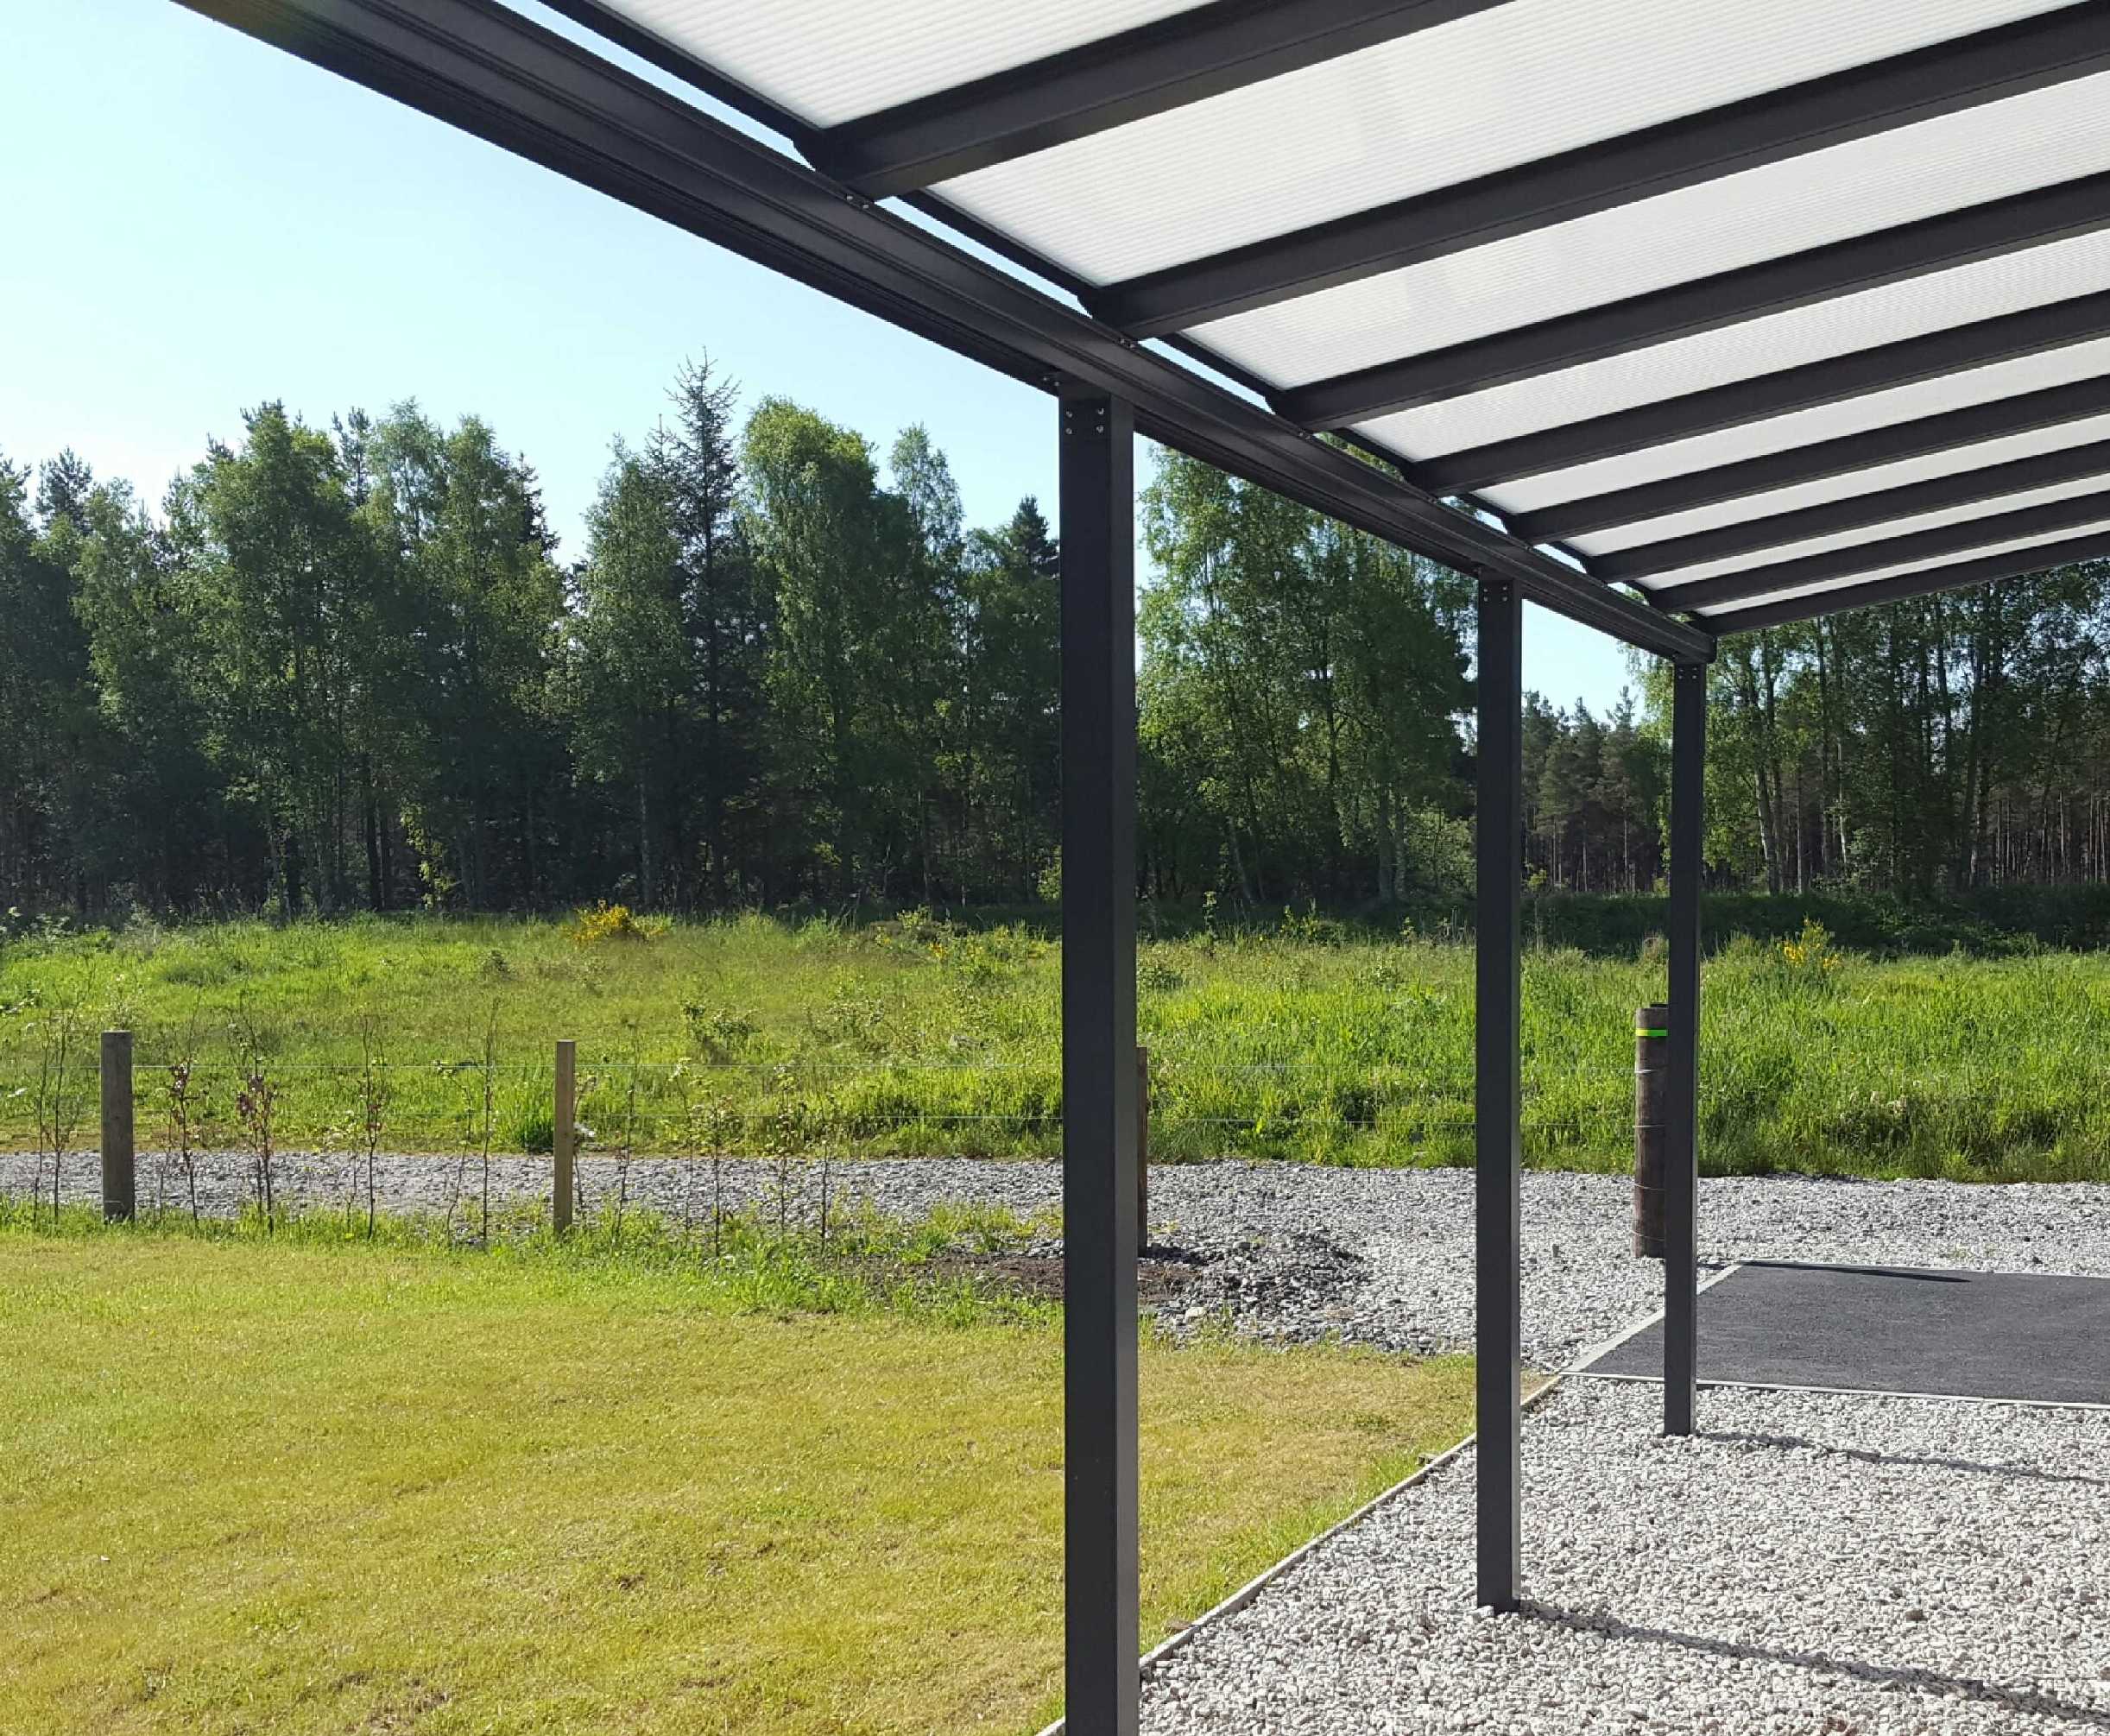 Omega Smart Lean-To Canopy, Anthracite Grey, 16mm Polycarbonate Glazing - 10.6m (W) x 4.0m (P), (5) Supporting Posts